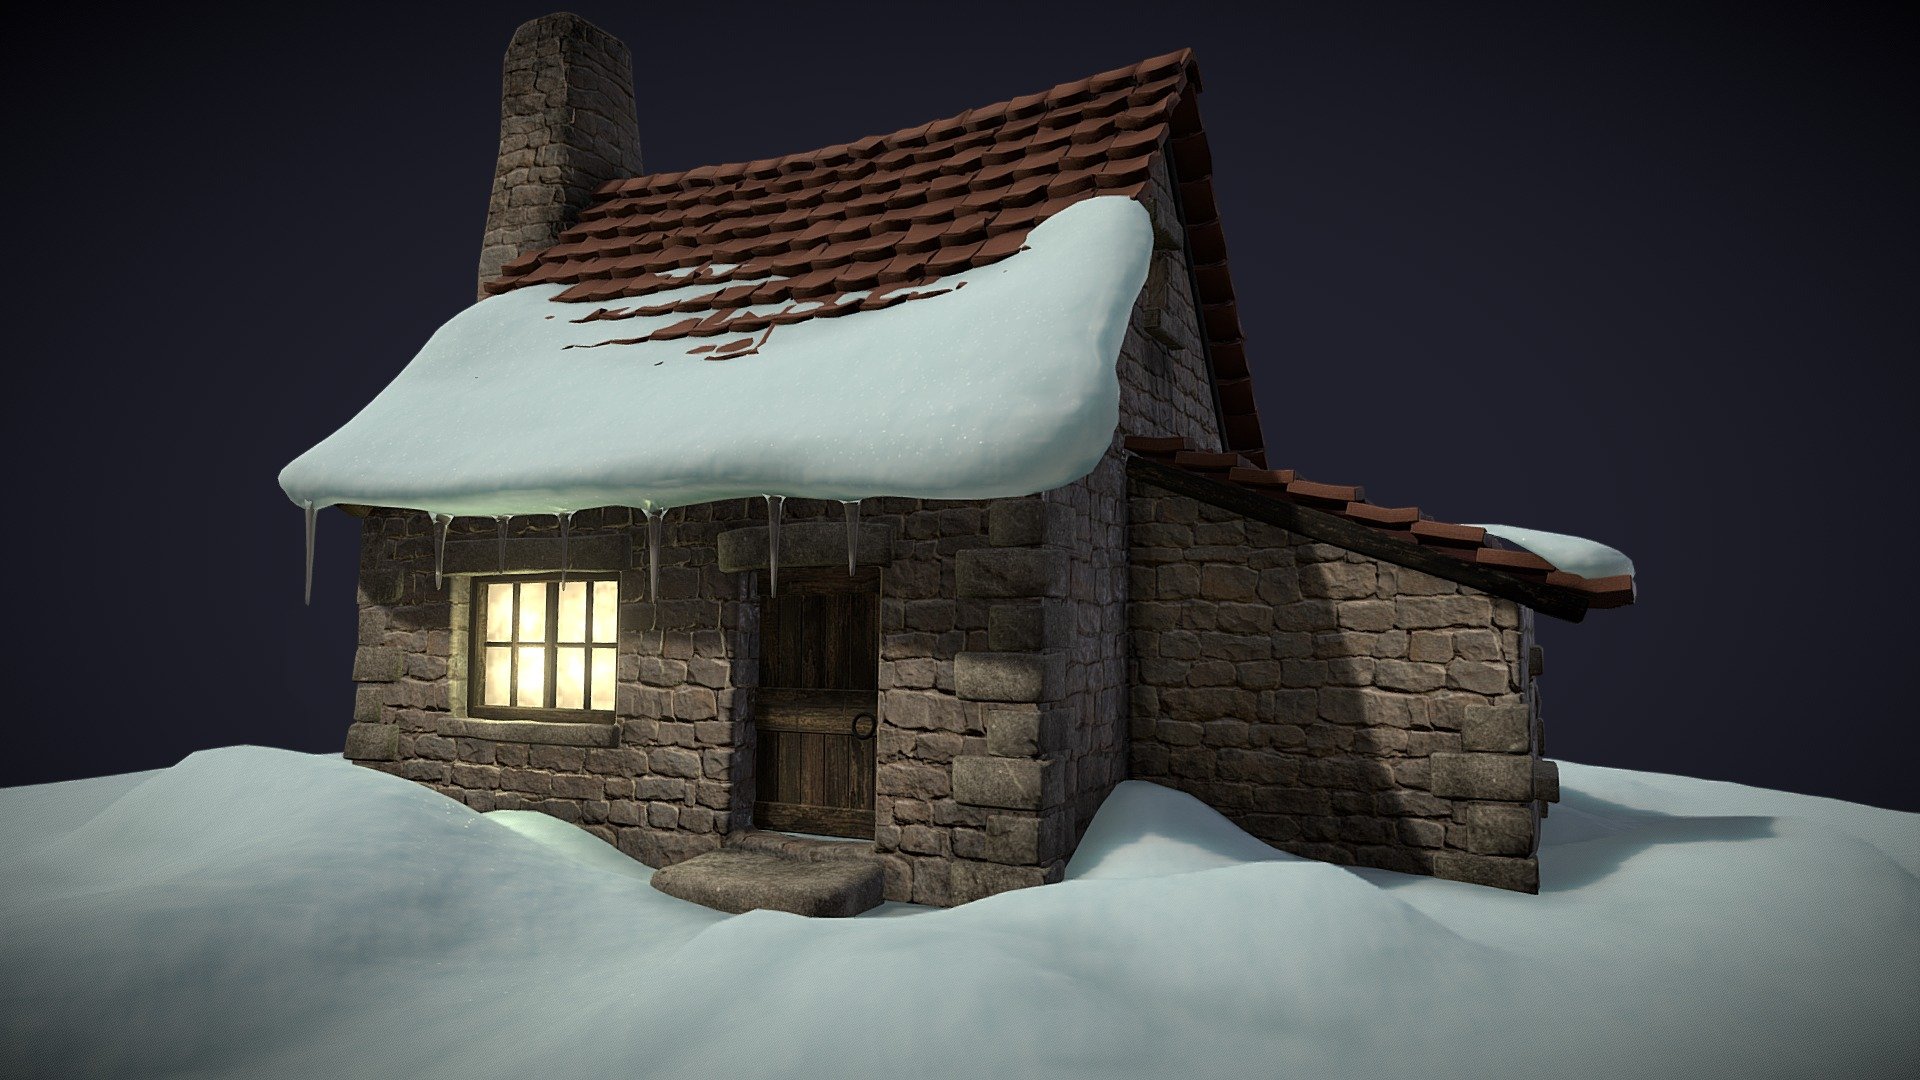 Updated with some snow texture and stalagmites - Small house in the snow - 3D model by GiyoP 3d model